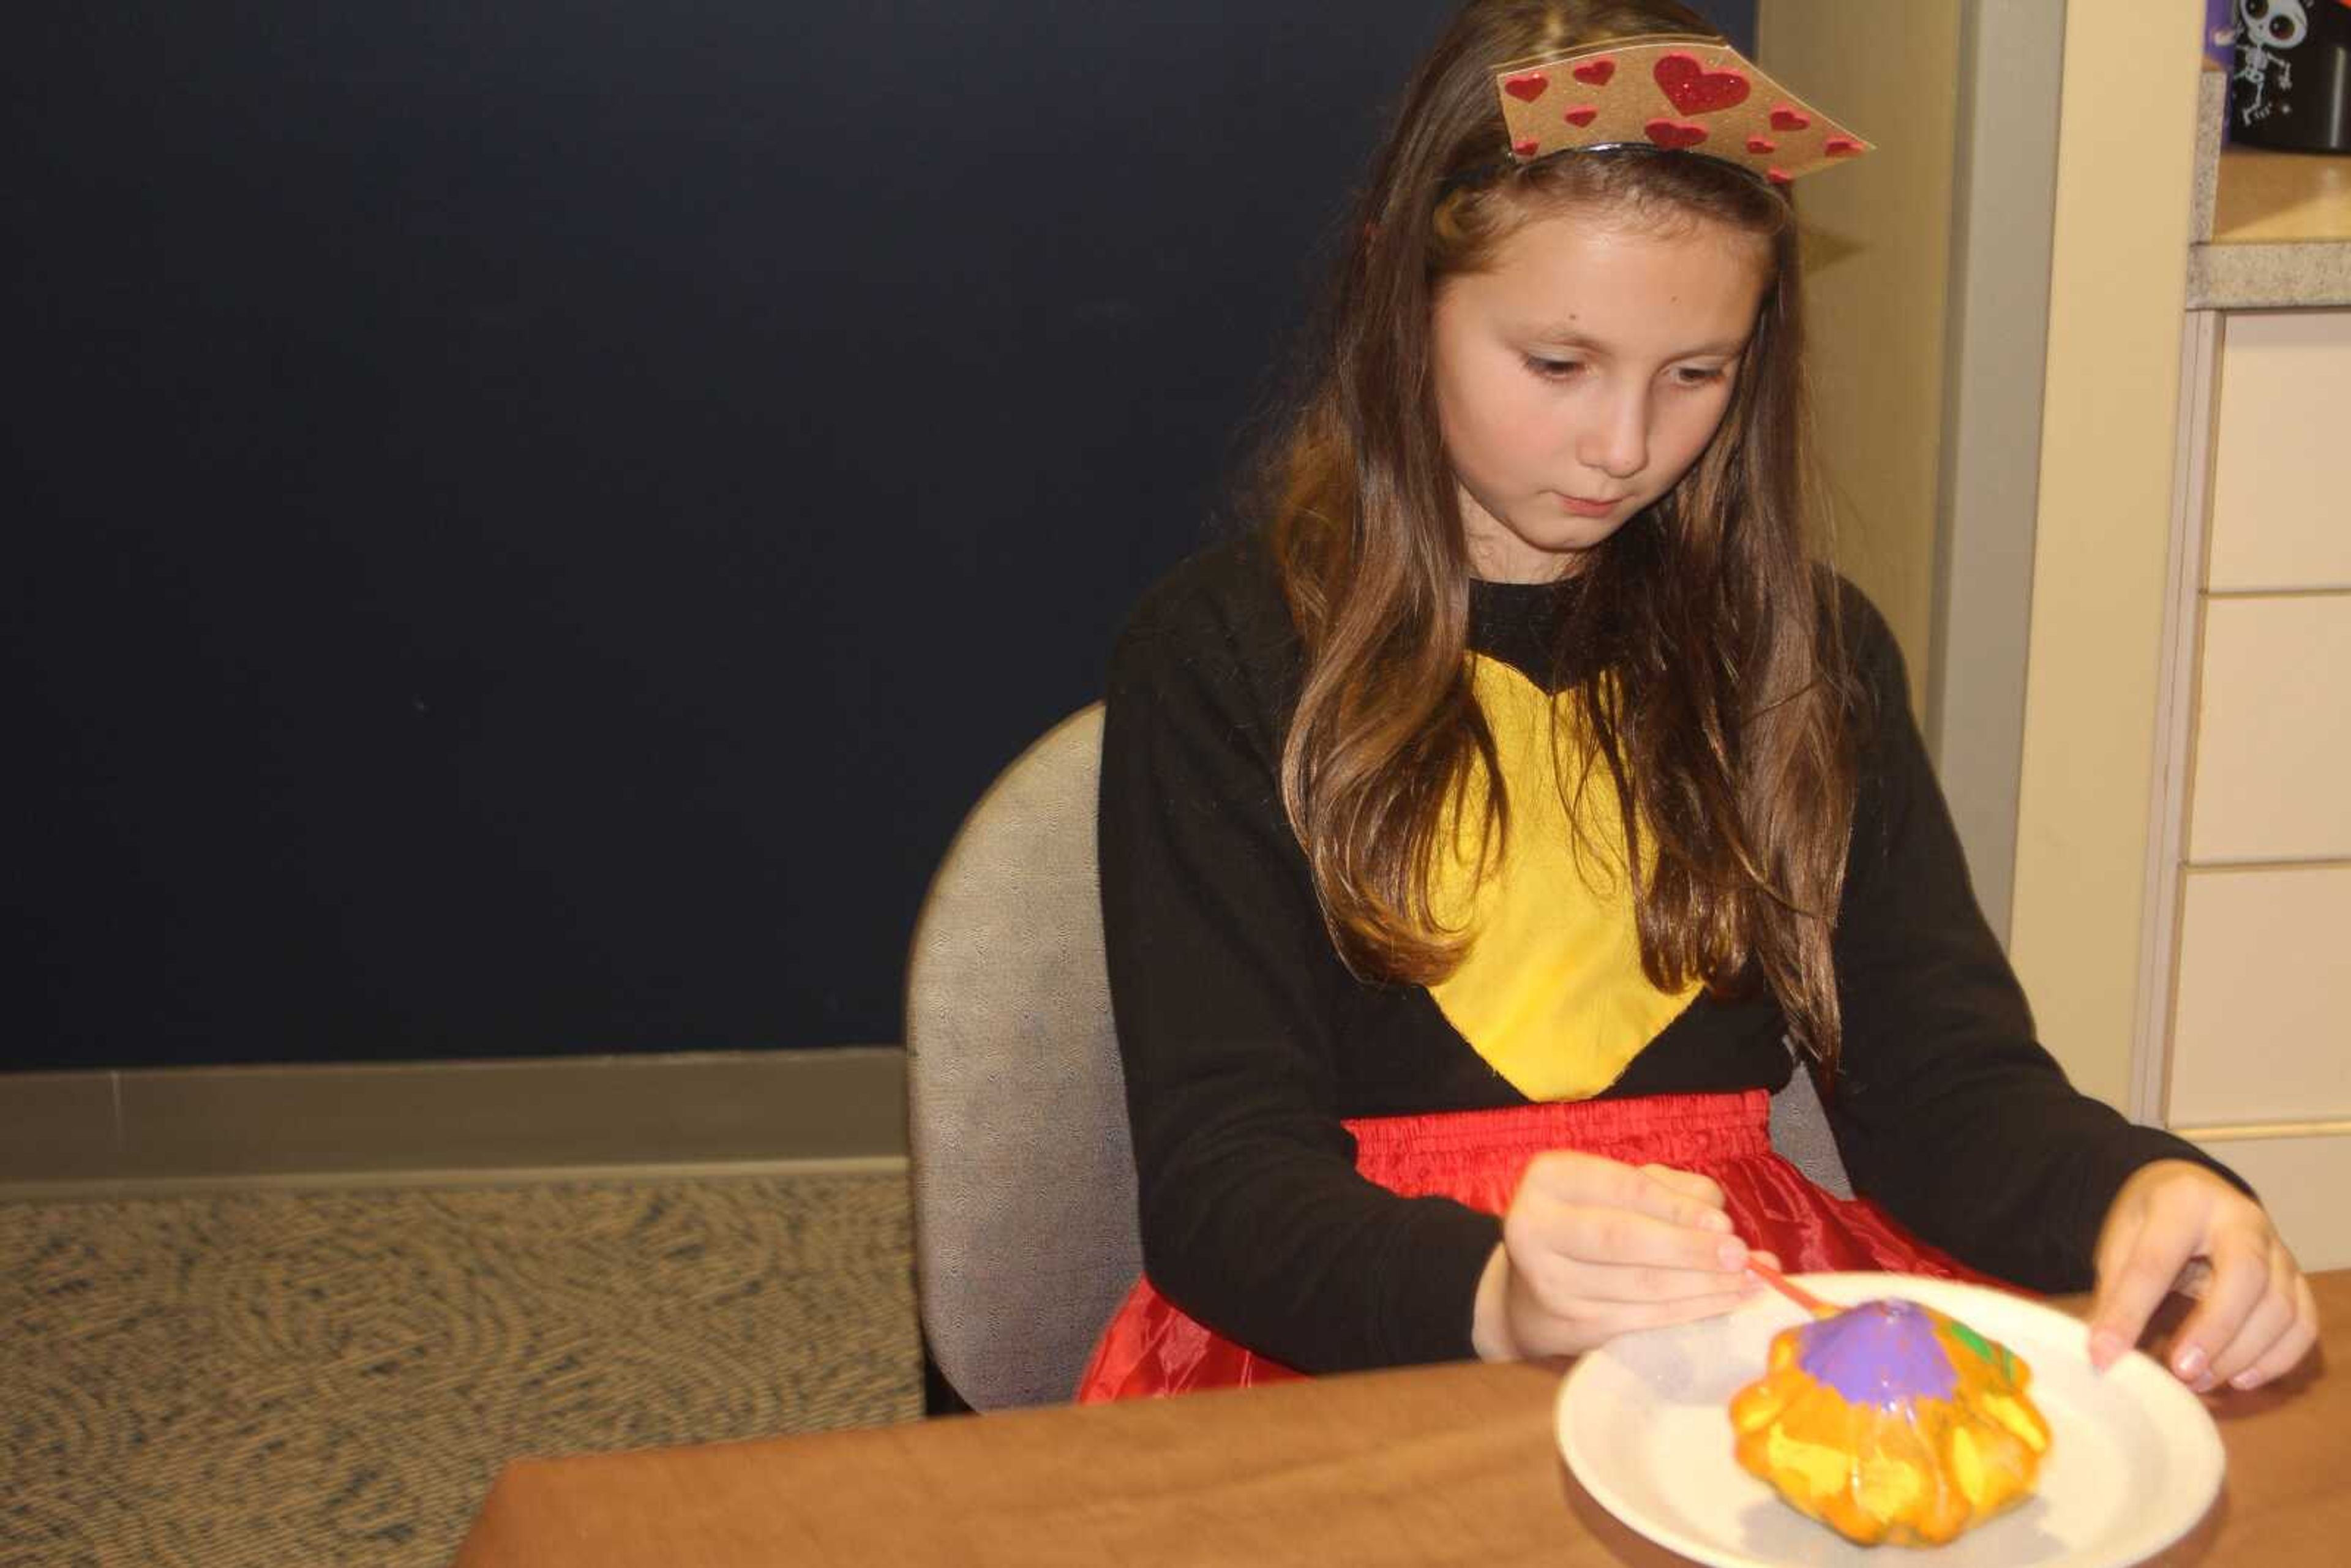 Vandiver Hall hosts Safe Trick-or-Treat in efforts to create outreach in the community